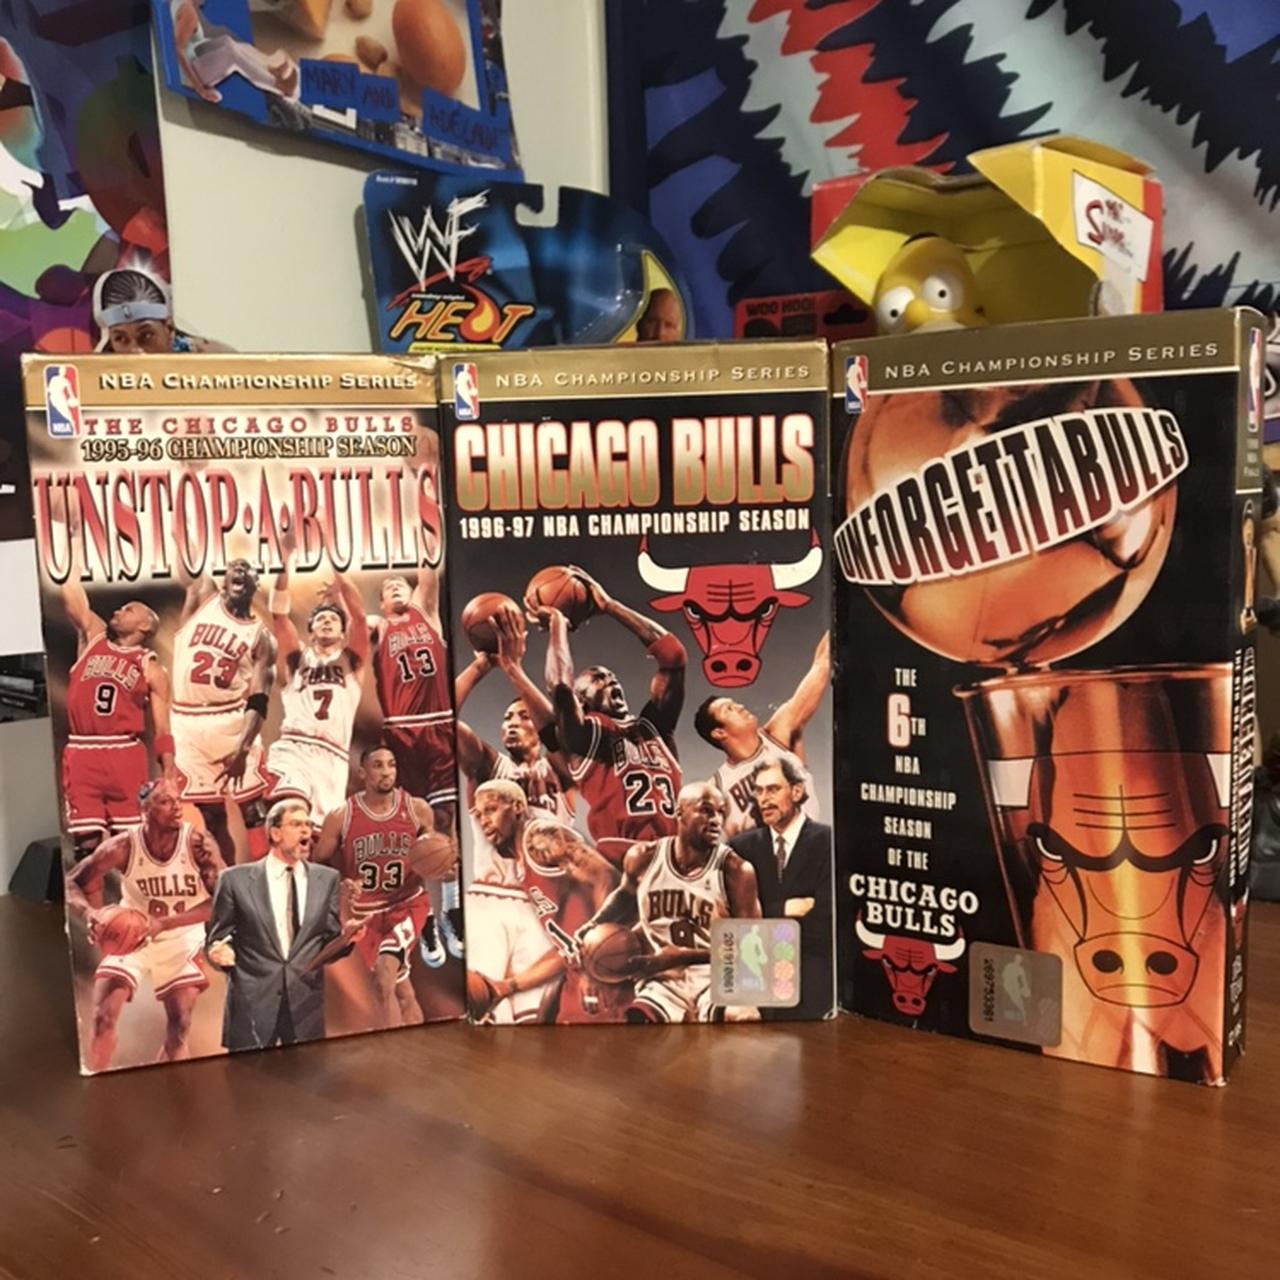 Chicago Bulls Championship3 peat VHS Tapes Must... - Depop